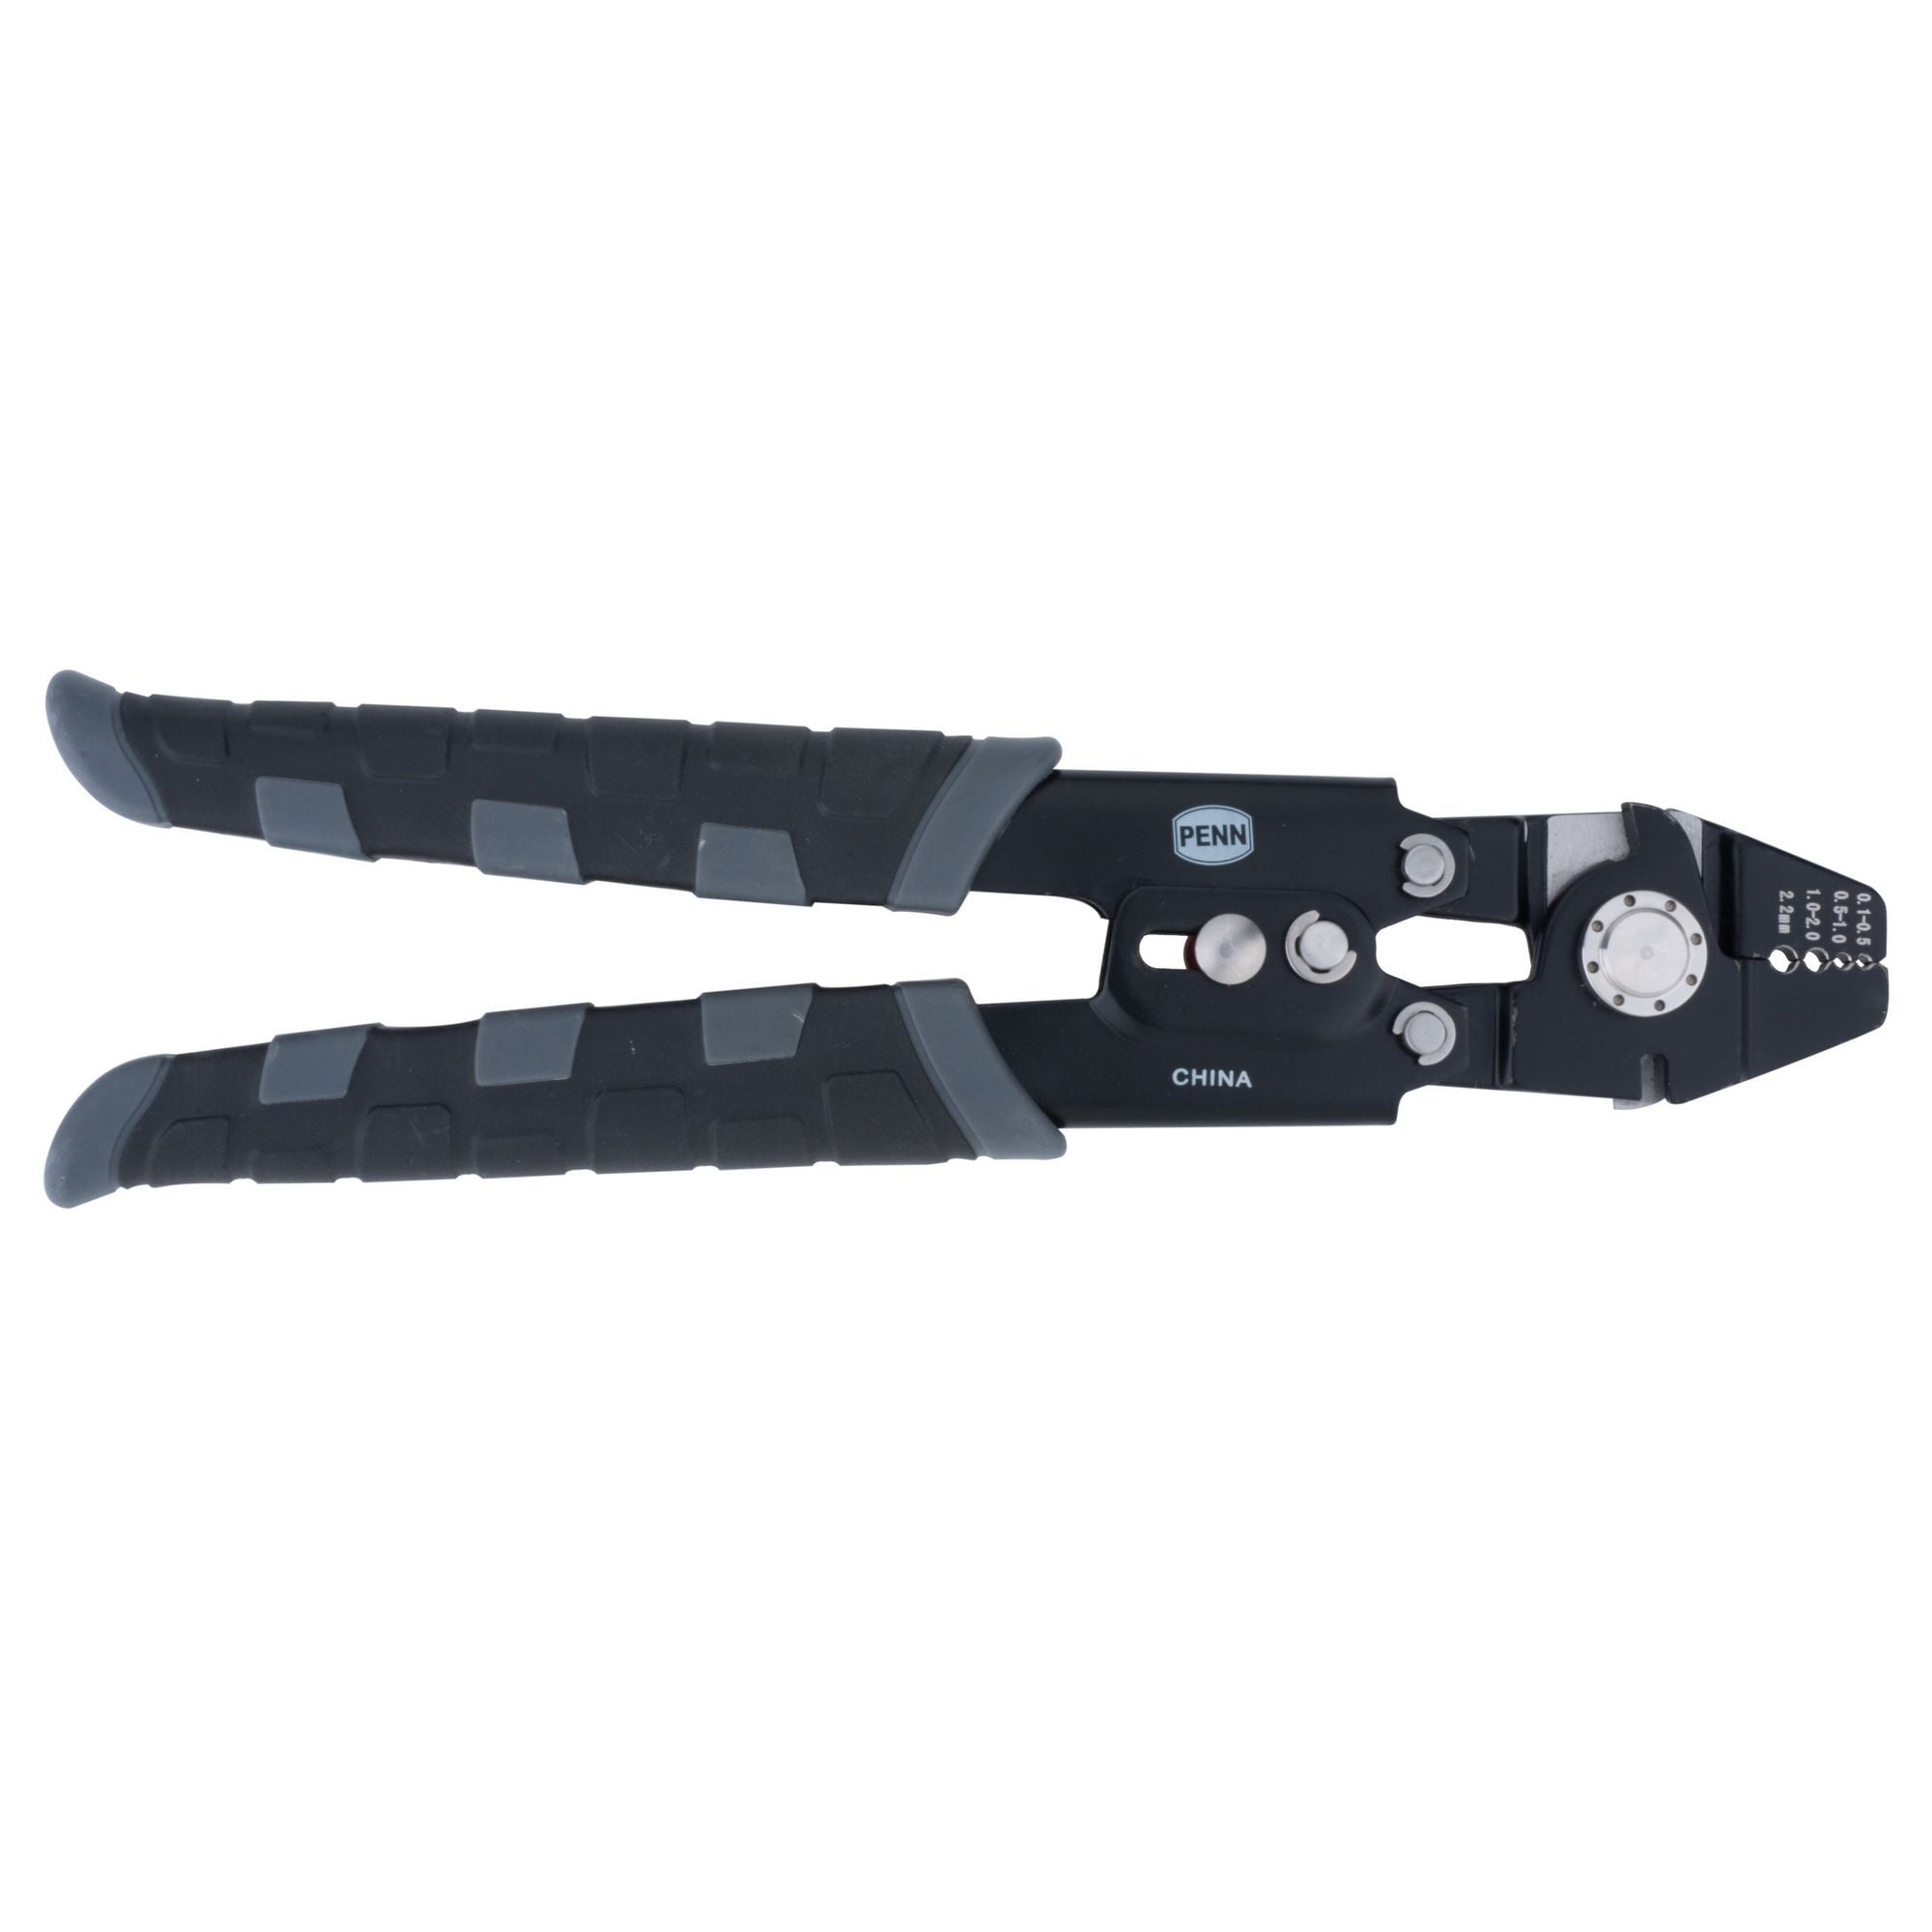 PENN Stainless Steel Leader Crimp Tool (Black and Gray) $19.48  + Free S&H w/ Walmart+ or $35+